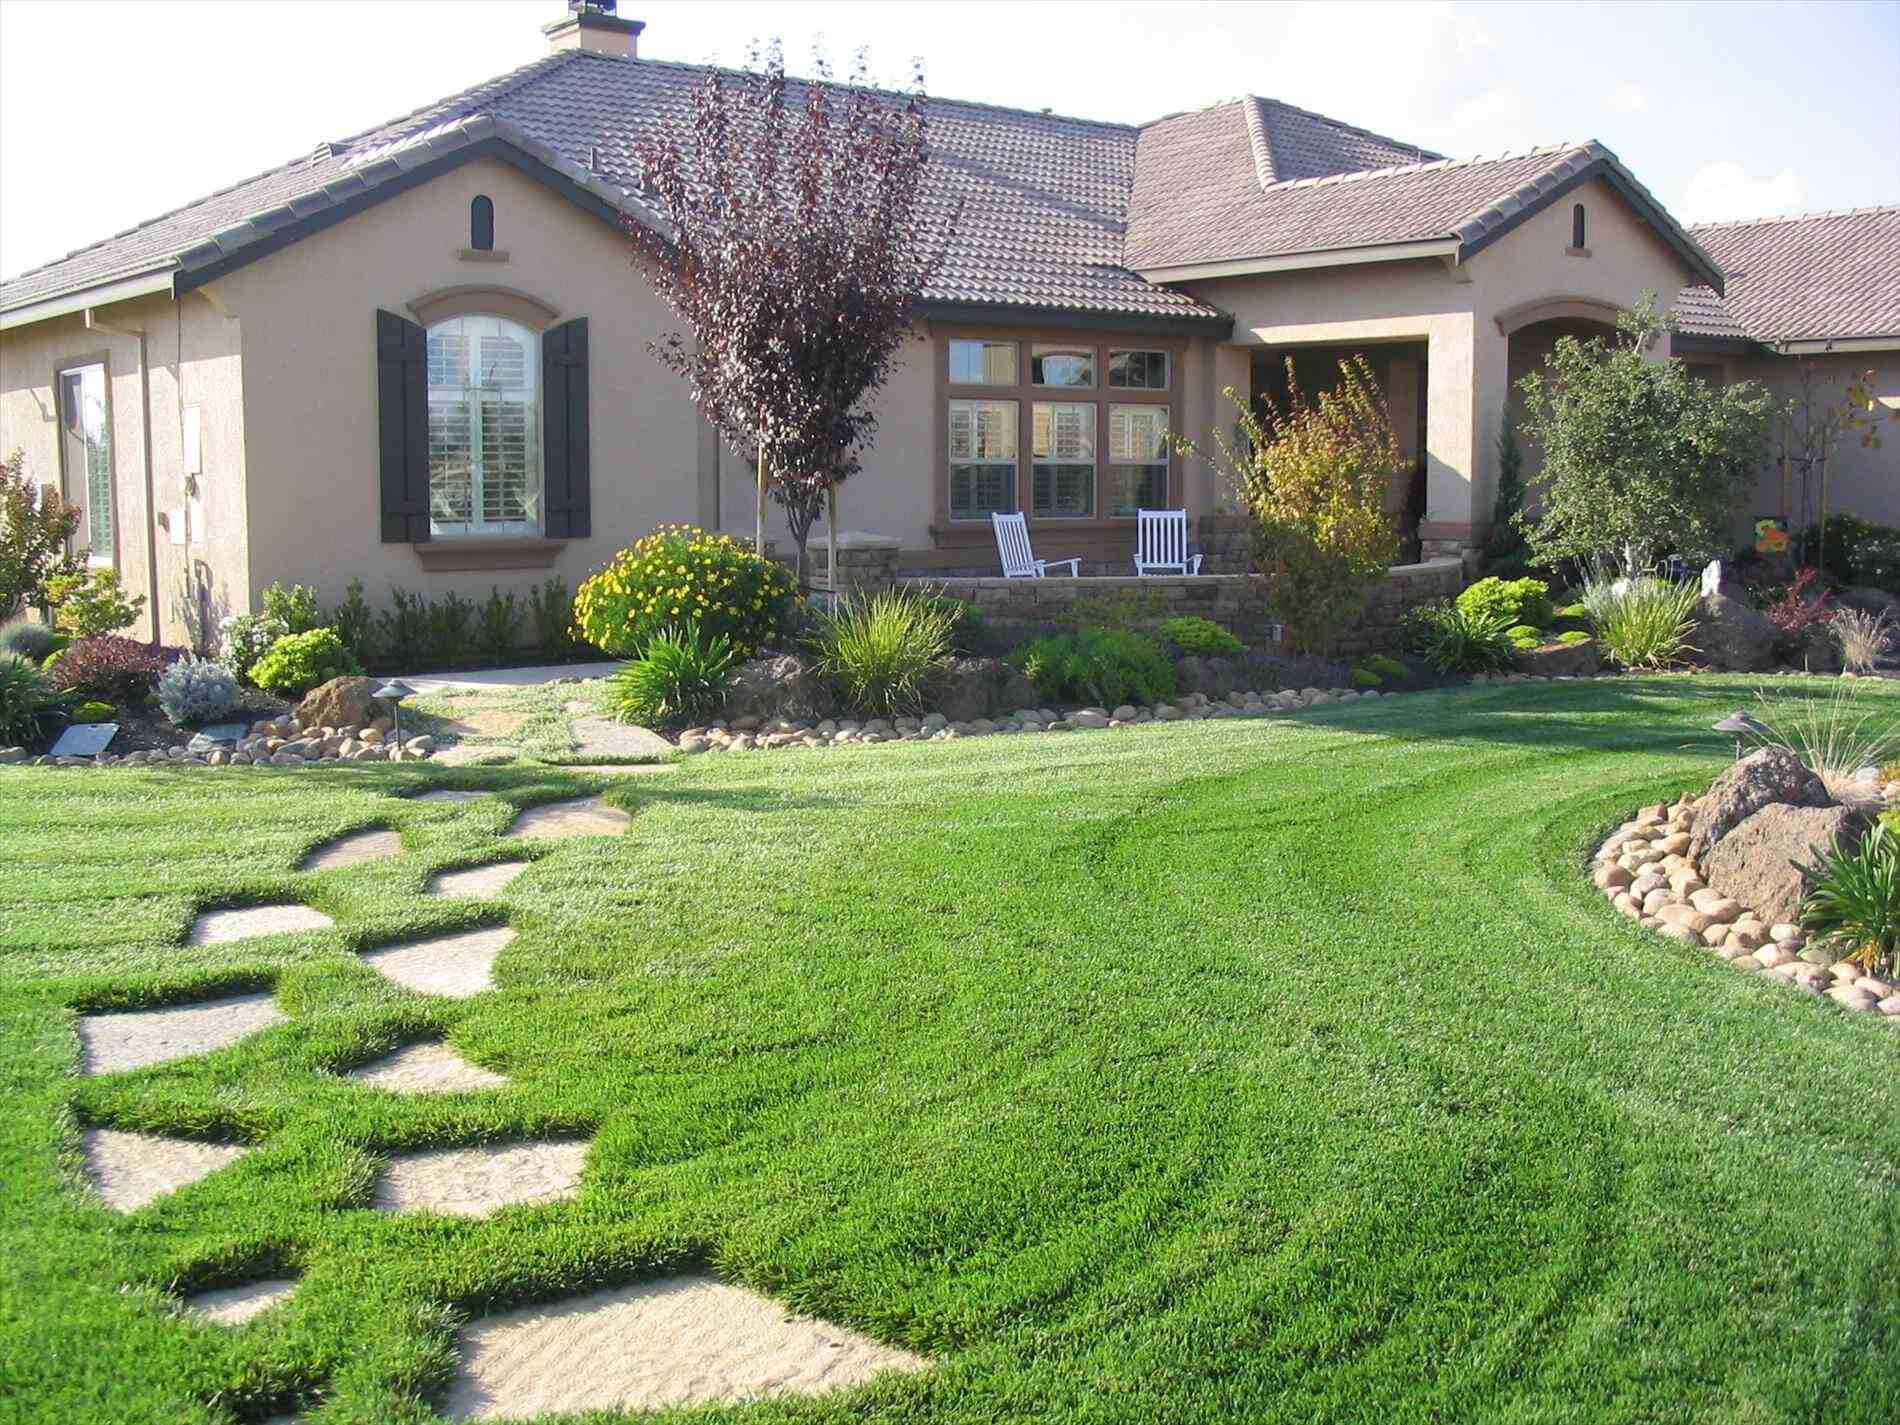 Landscape Pictures Front House
 Tips to Landscaping with Ranch Style Home Interior